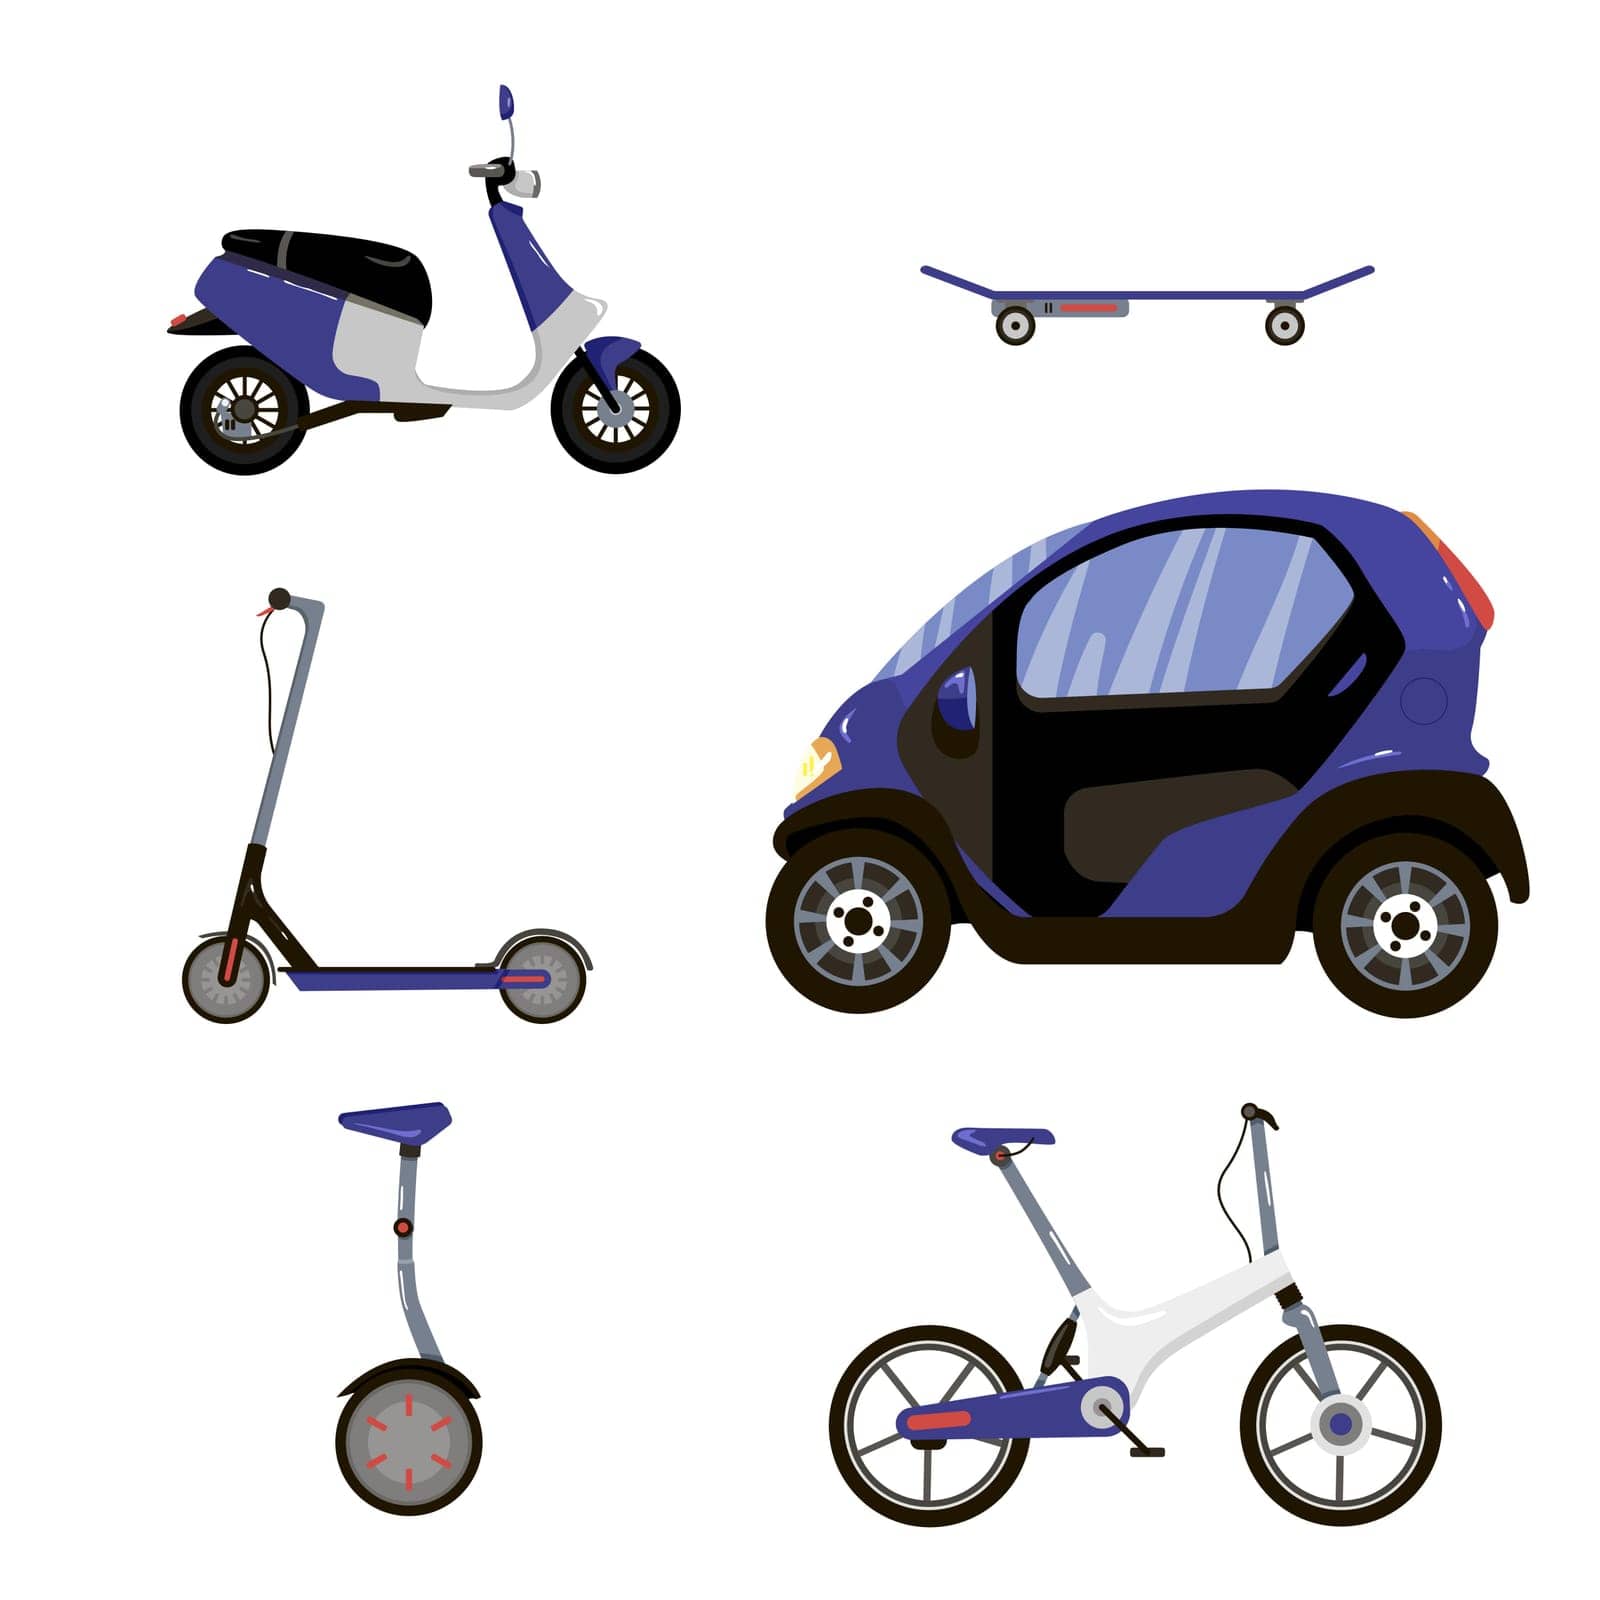 Modern electric scooter, board, bike, moped, car, monowheel isolated on white background. Personal electrical vehicles cartoon vector illustration set. Eco transport, caring for environment concept